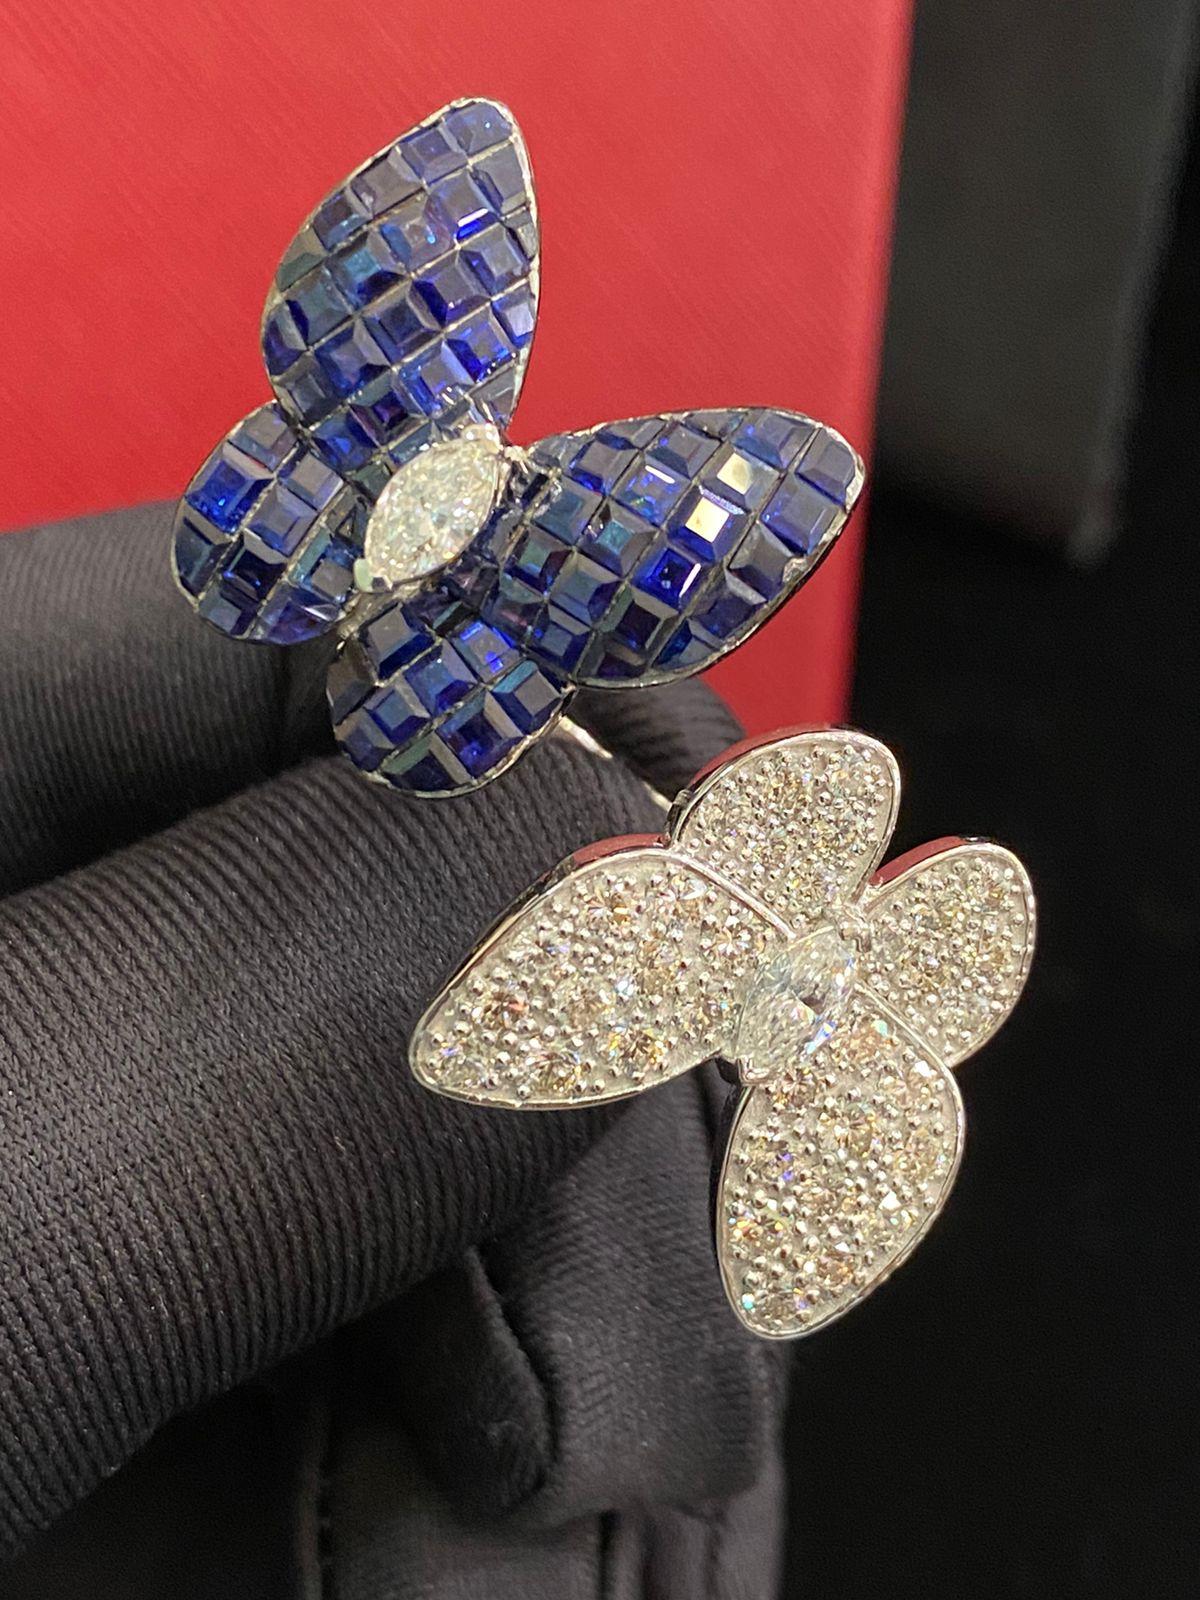 So gorgeous butterfly design in 14k gold with blu sapphires ct 6,50 and two marquise cut diamonds 0,66 ct G/SI, round brilliant cut 1,80 ct G/SI.
Handmade jewelry by artisan goldsmith.
Excellent manufacture and quality.